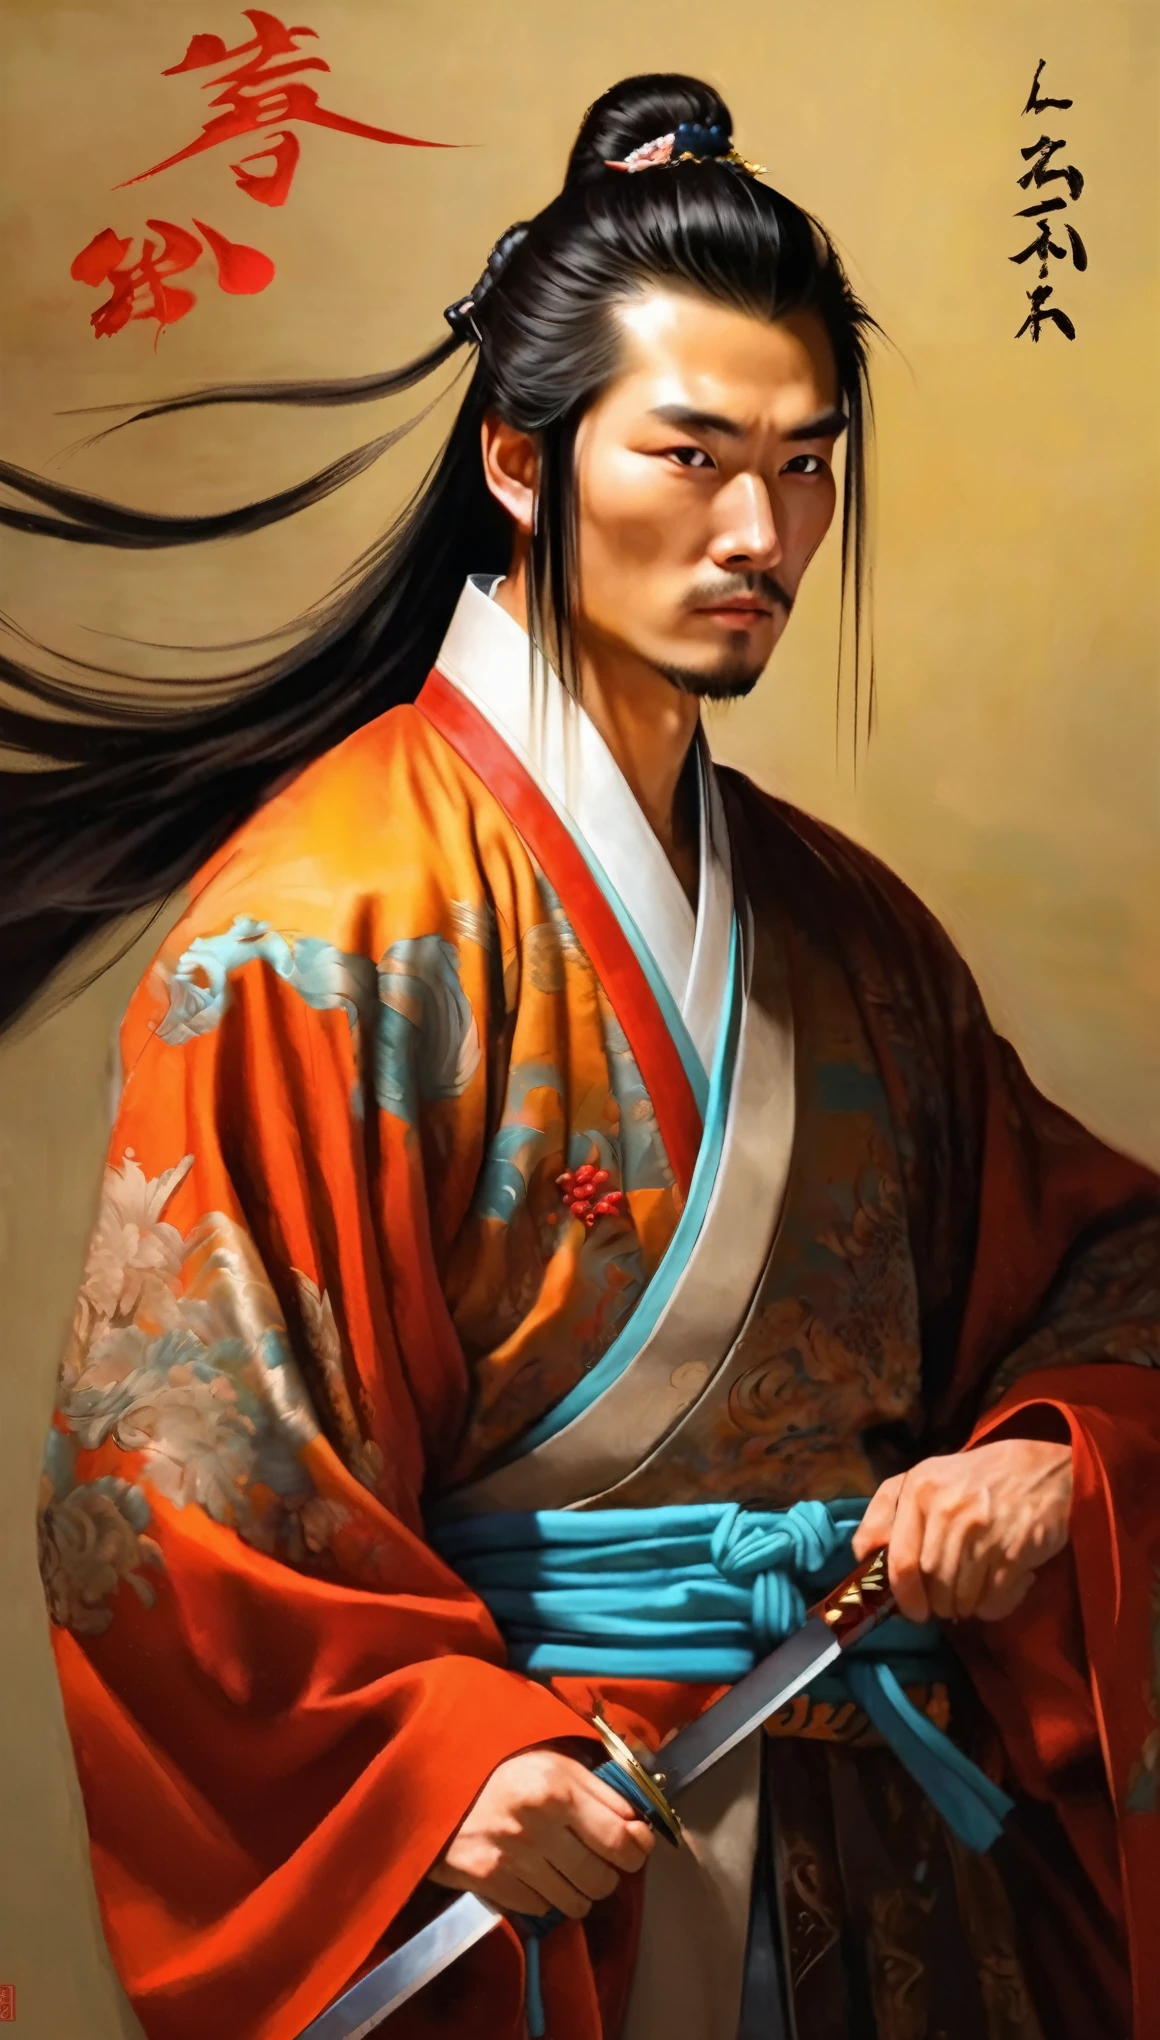 (chinese ancient swordsman:1.1),oil painting,ancient warrior,skilled swordsman,(dynamic pose with sword in hand), wise and noble appearance,flowing robes,serene expression,detailed facial features,classic backdrop,subtle lighting,colorful details,authentic costume,traditional weapon,masterpiece:1.2,portraits,vivid colors,sharp focus